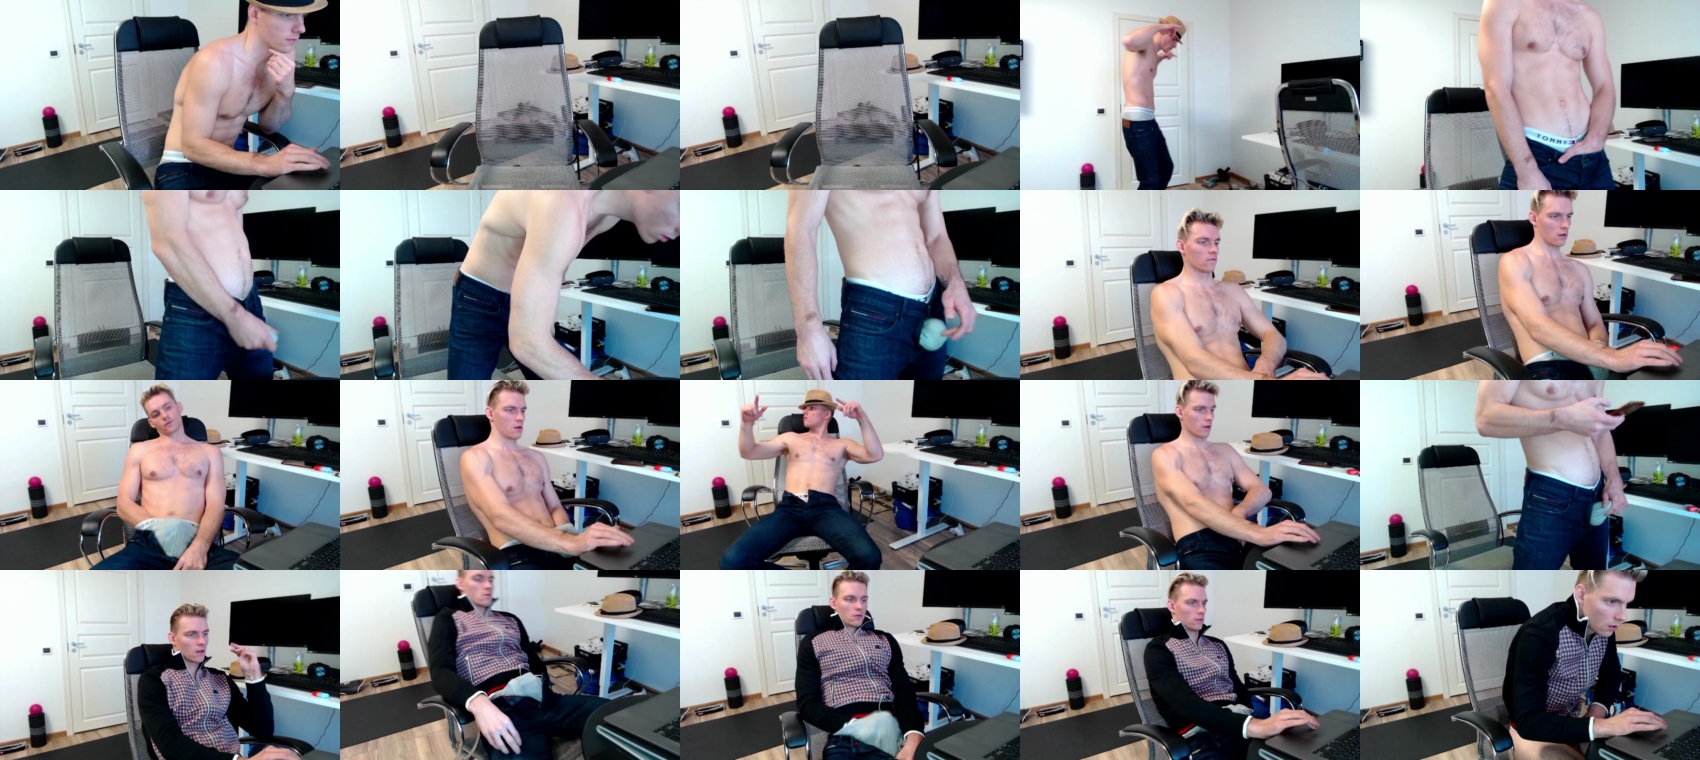 cockagent007 sexybody CAM SHOW @ Chaturbate 22-10-2022